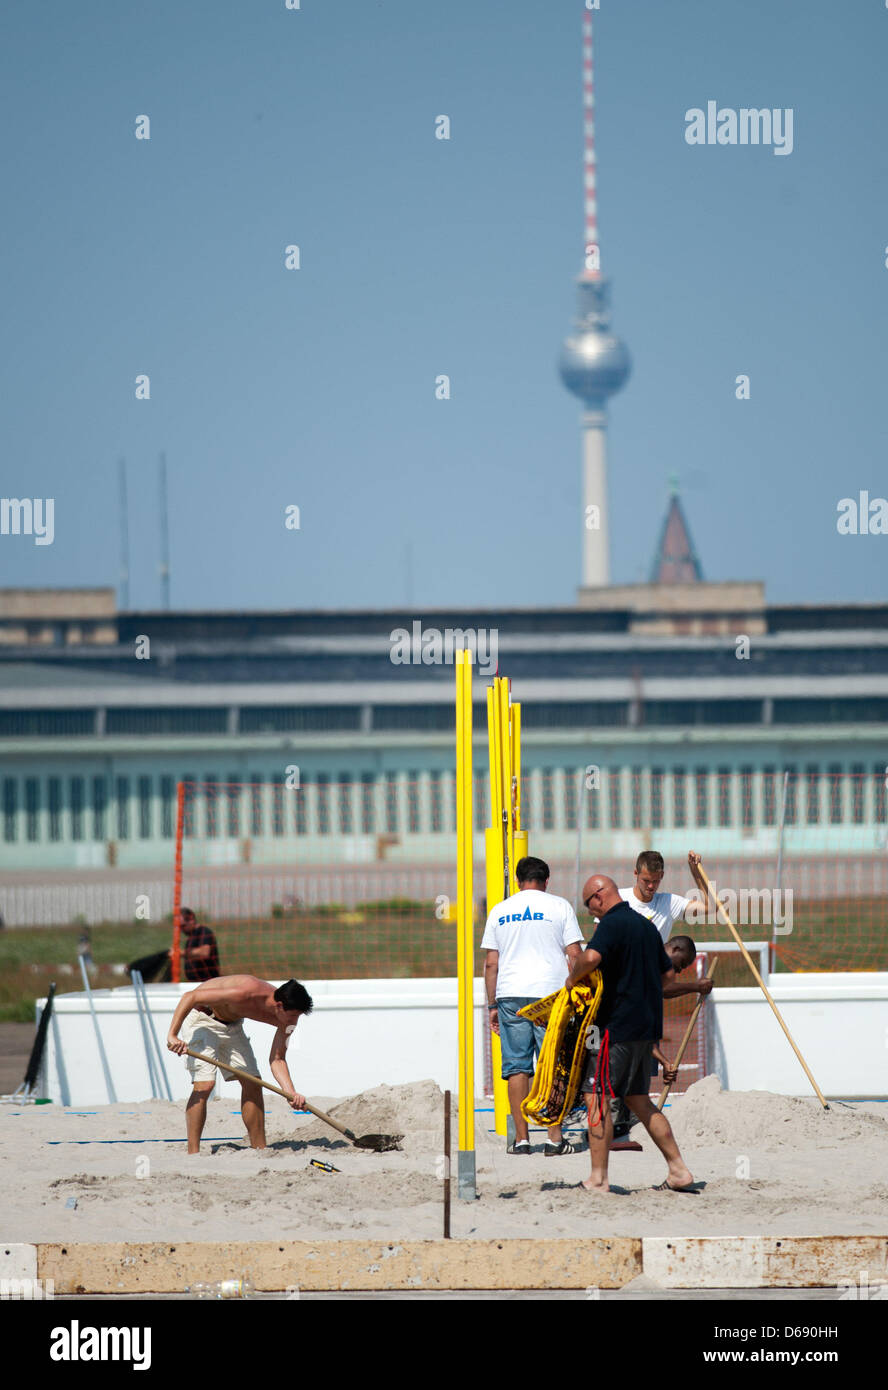 Works build a beach volleyball field for the Olympic Fan Mile at Tempelhofer Feld in Berlin, Germany, 25 July 2012. 'The Games in Berlin' is the name of the live broadcast event by the Berlin Hockey Club (BHC) where the Summer Games in London will be broadcast on a large screen daily from Friday 27 July 2012. Photo: Maurizio Gambarini Stock Photo